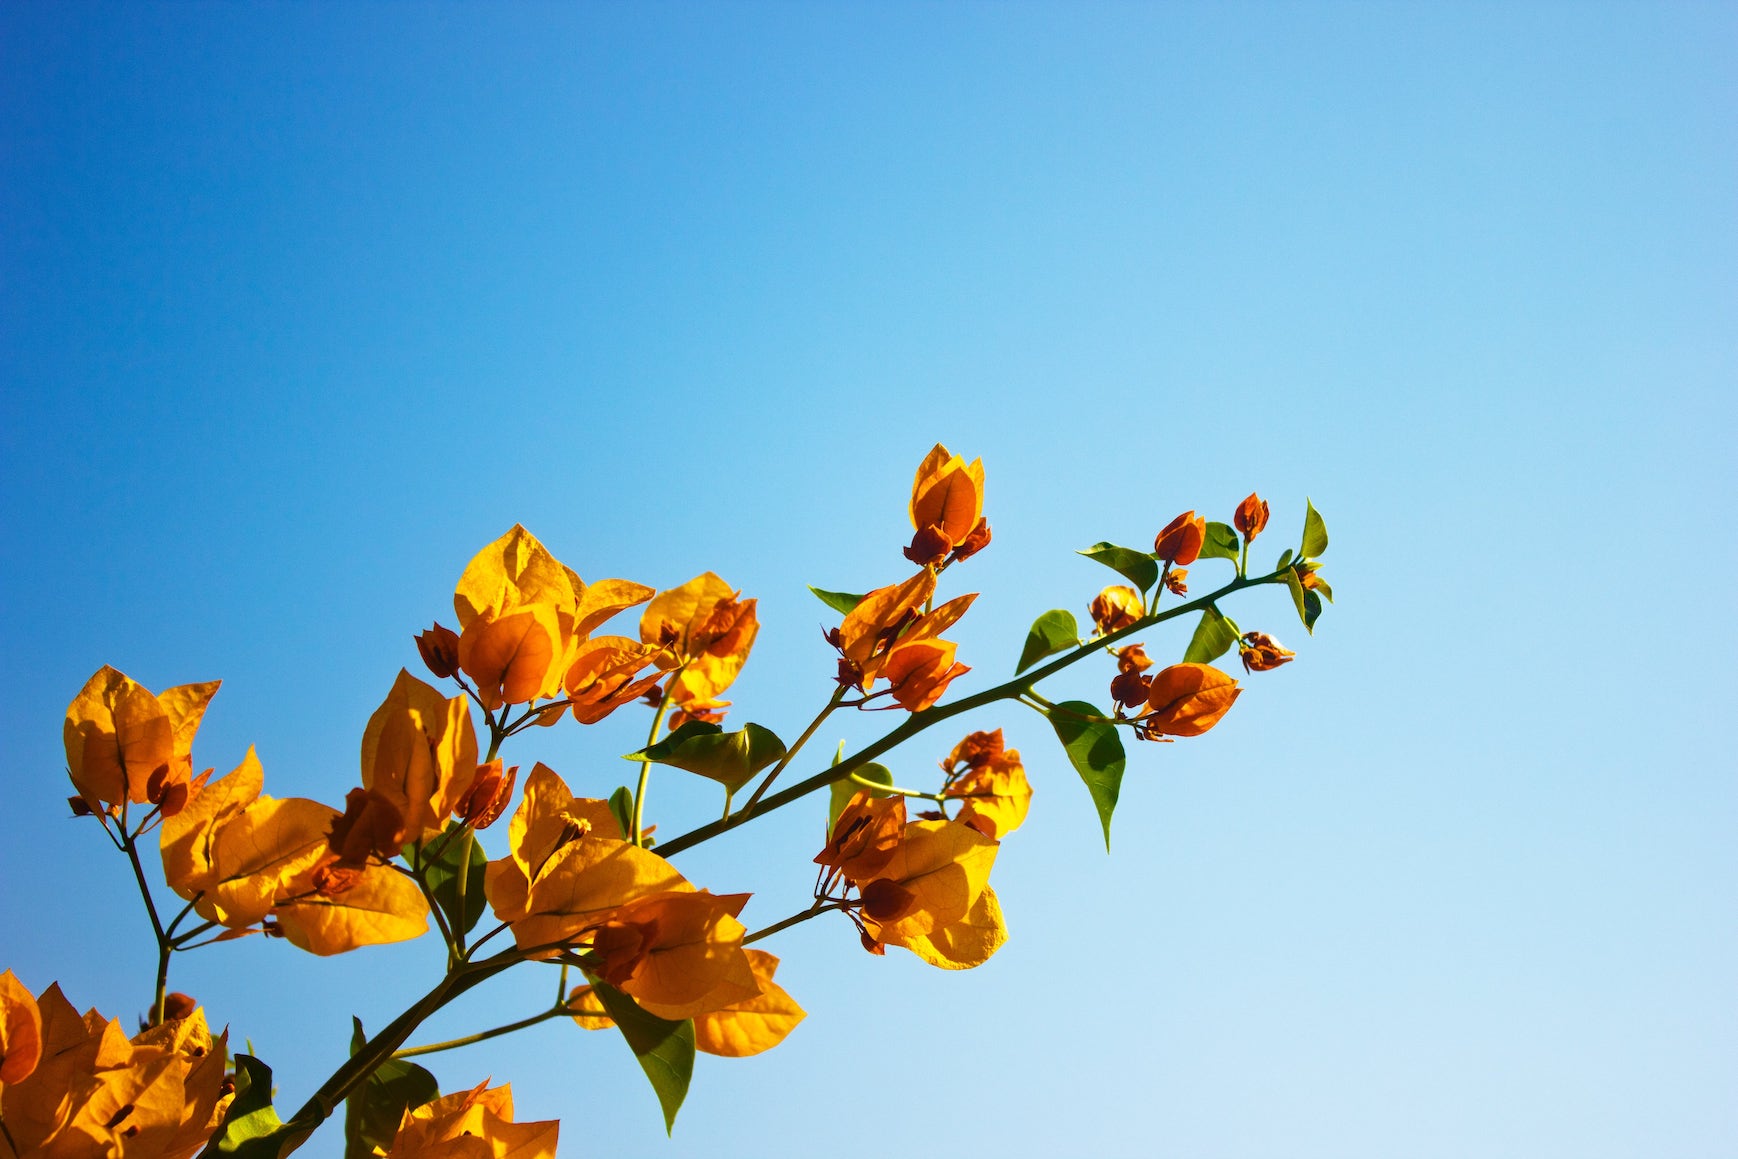 A flowering branch reaching for a blue sky. Photo by Poorva Rawat on Unsplash.